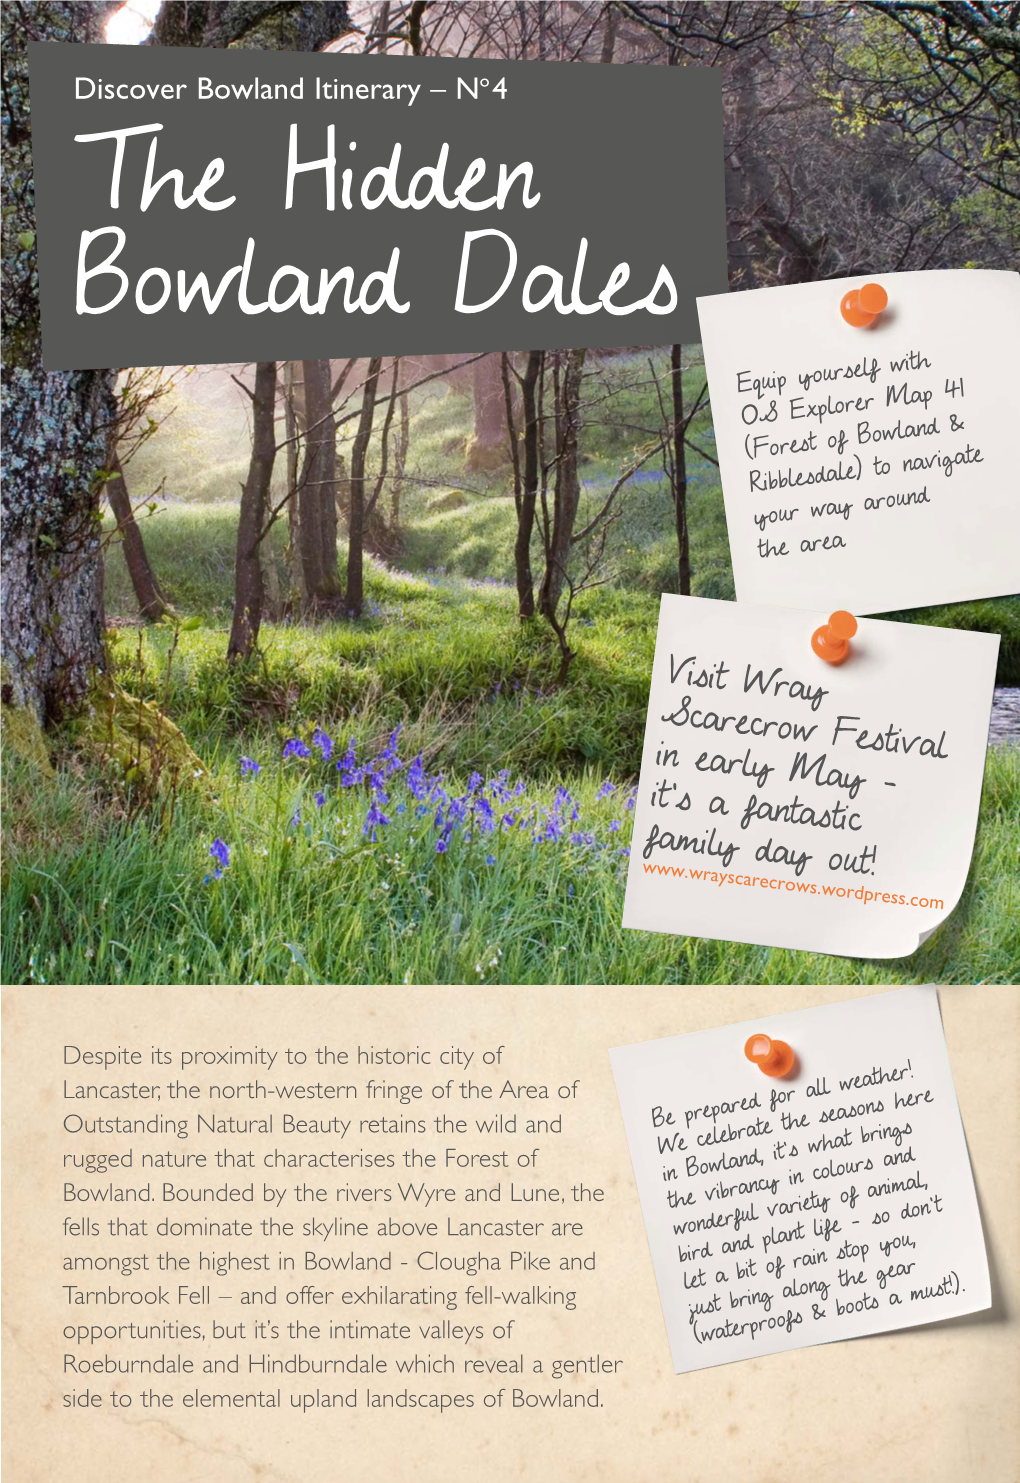 The Hidden Bowland Dales